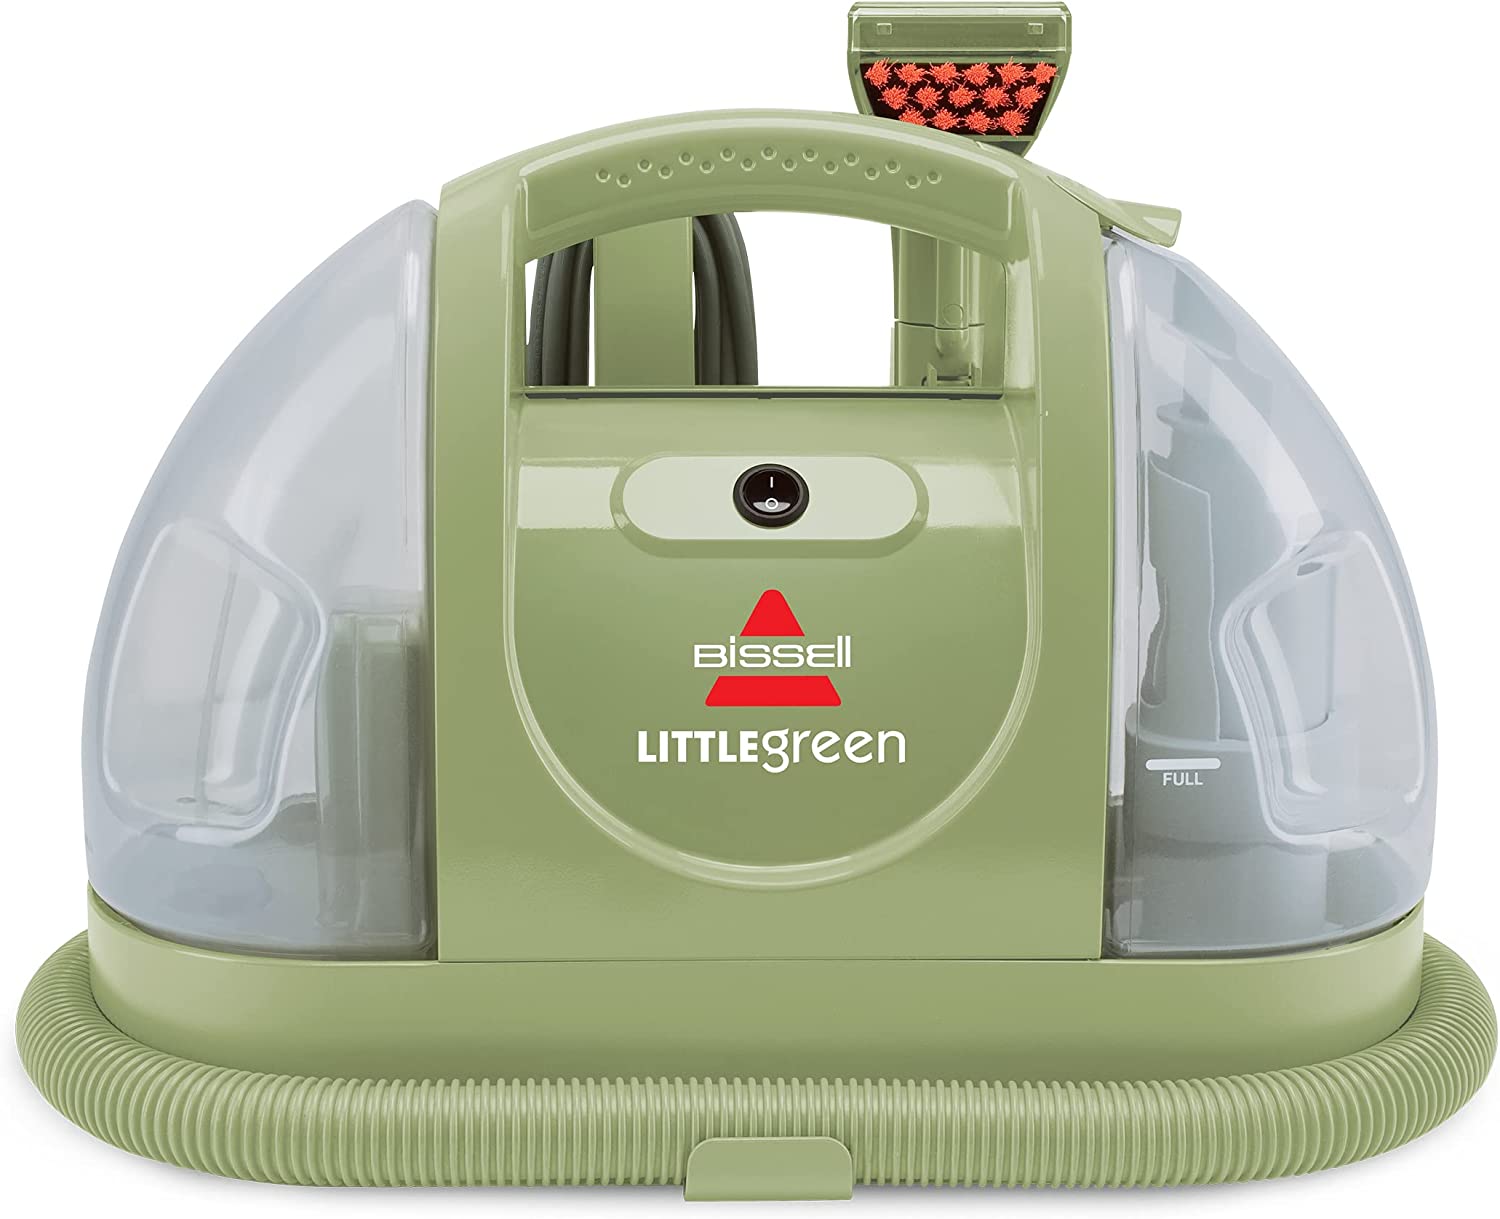 Bissell Little Green Carpet and Upholstery Cleaner Logo